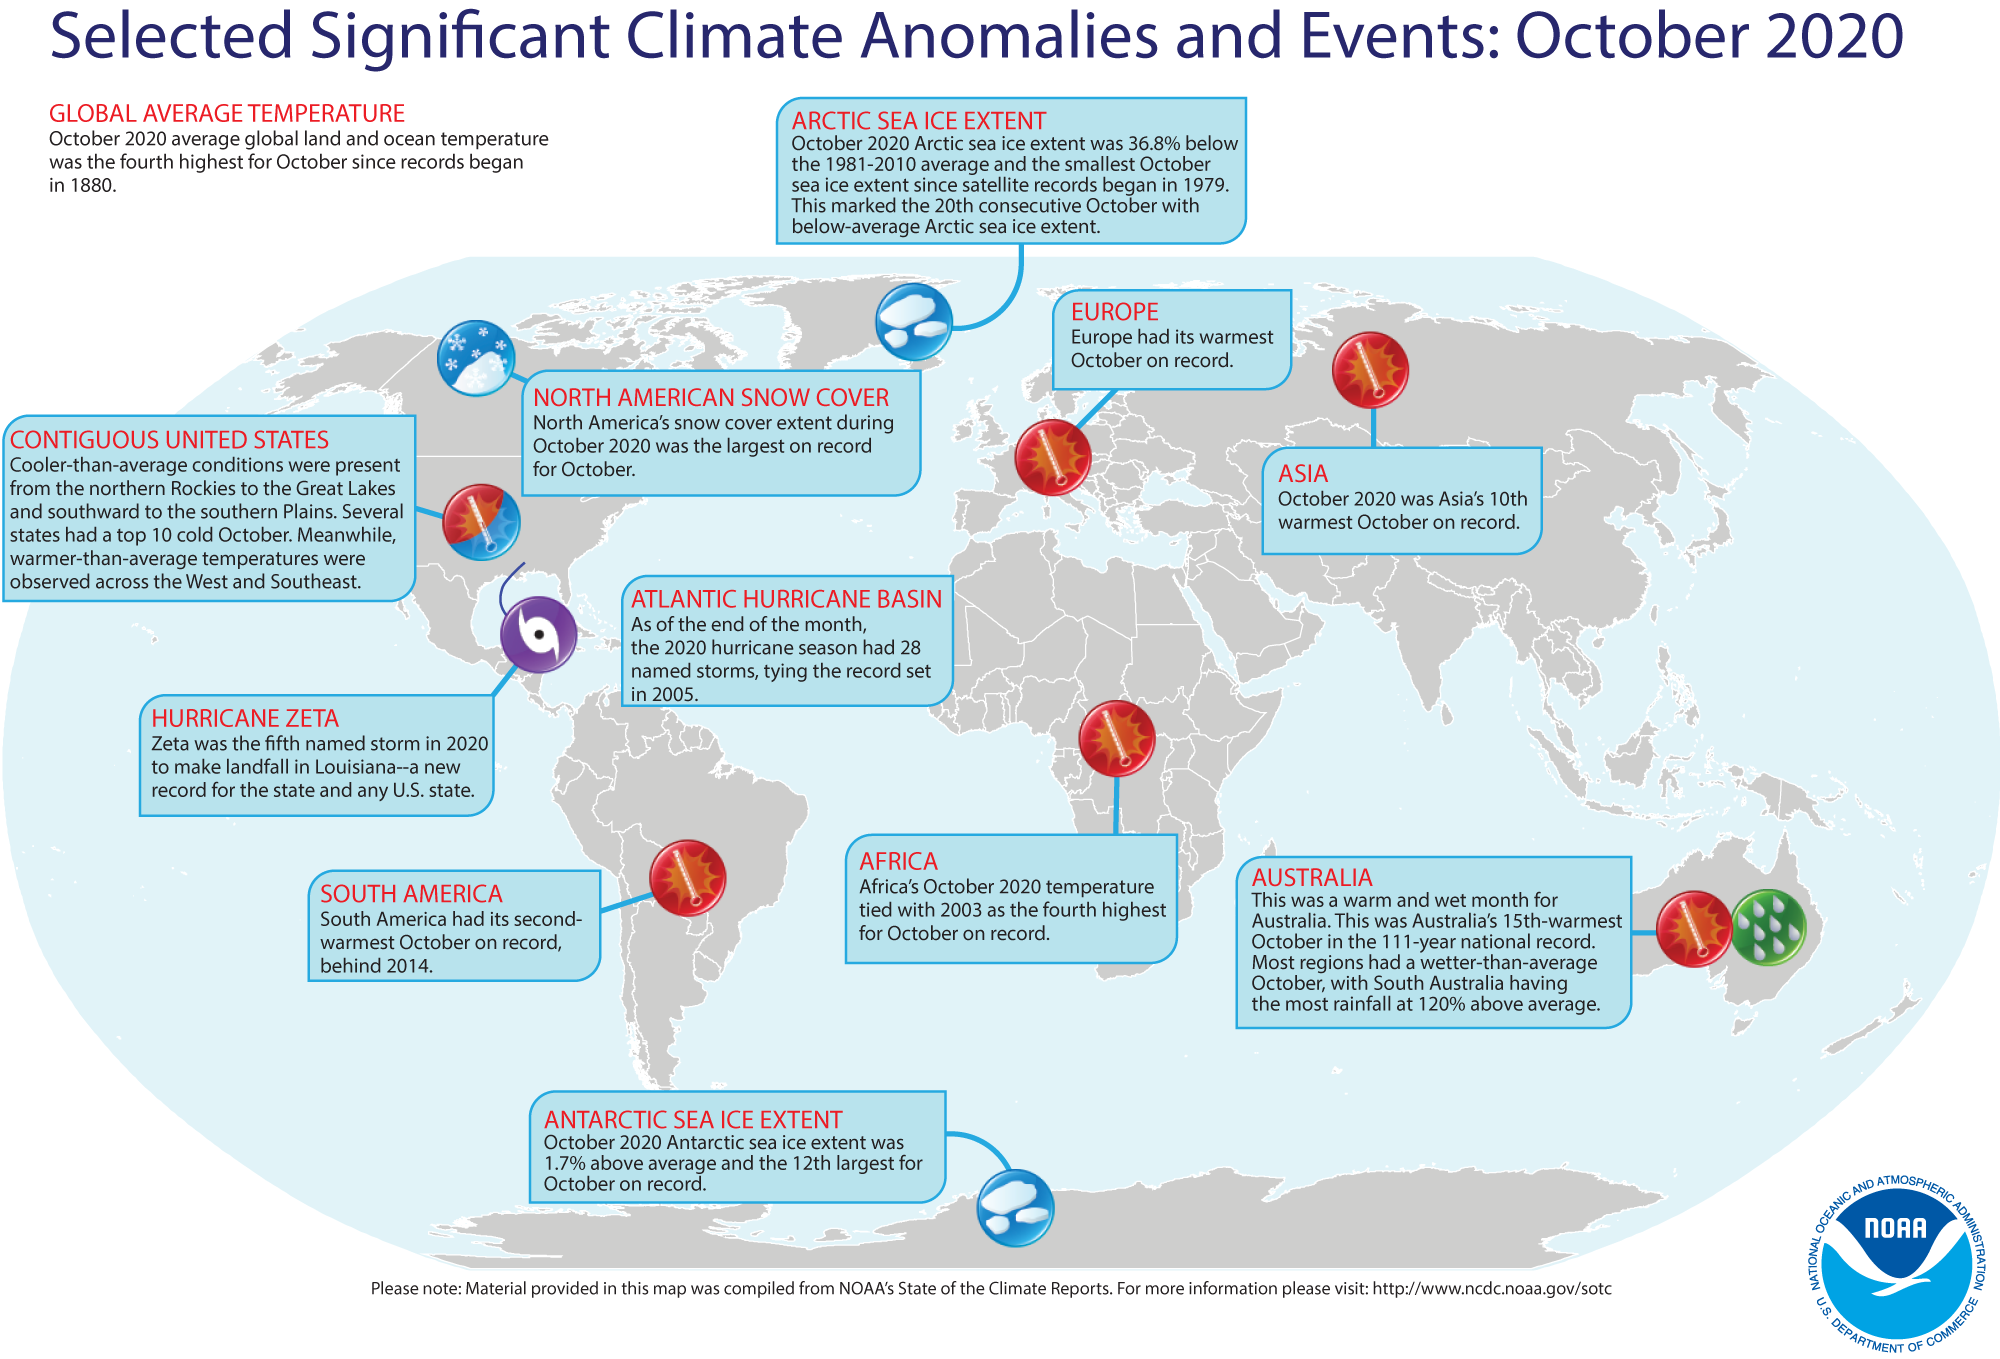 An annotated map of the globe showing notable climate and weather events that occurred across the country during October 2020. For text details, please visit http://bit.ly/Global202010.